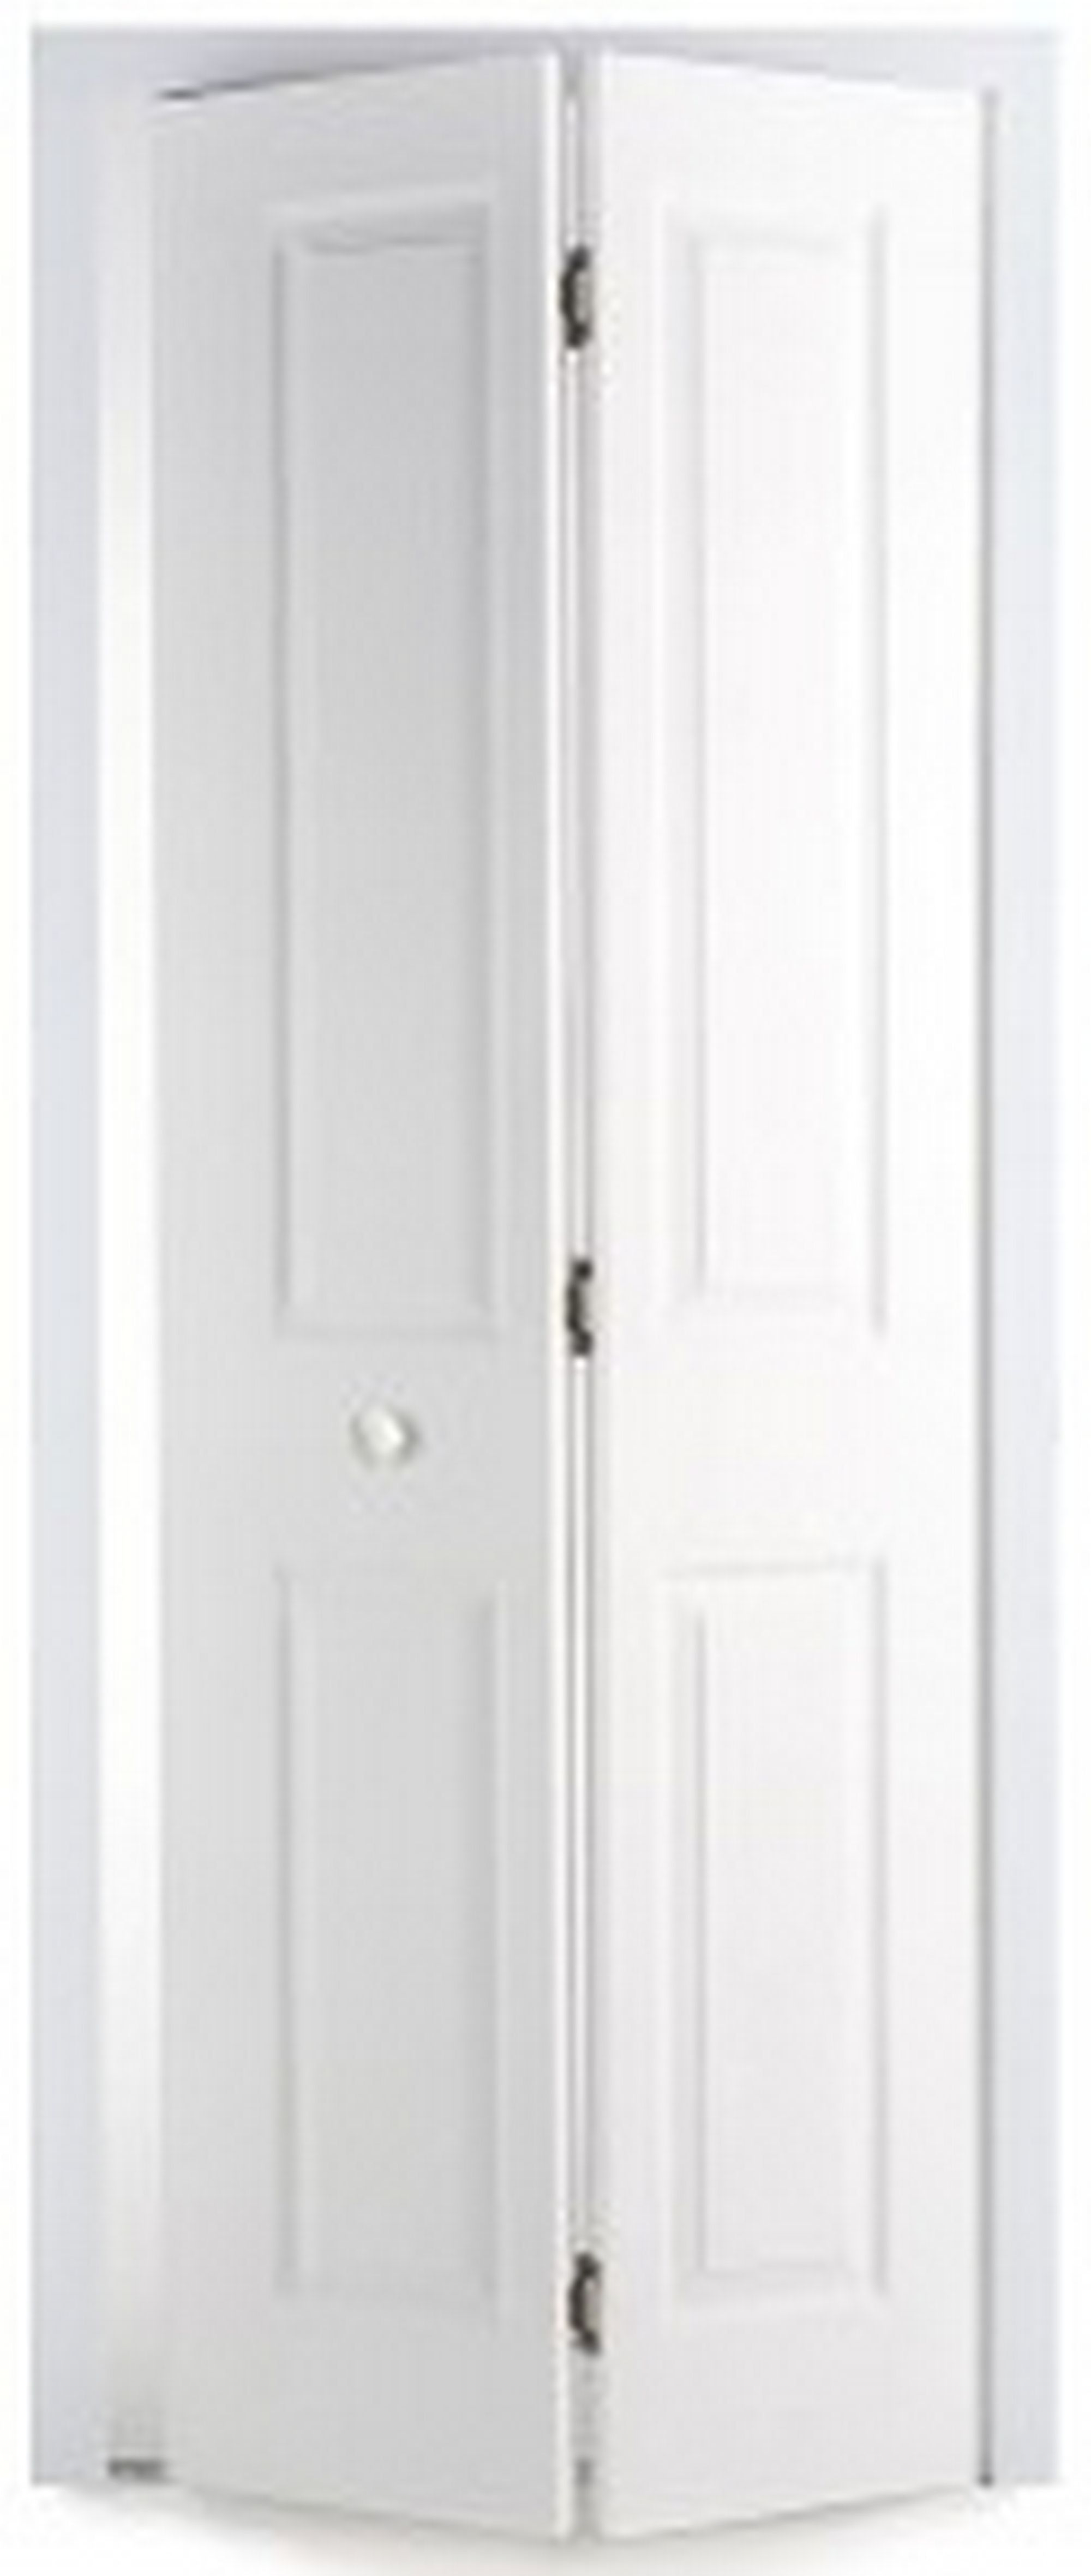 Image of Wickes Chester White Grained Moulded 4 Panel Internal Bi-Fold Door - 1981mm x 762mm